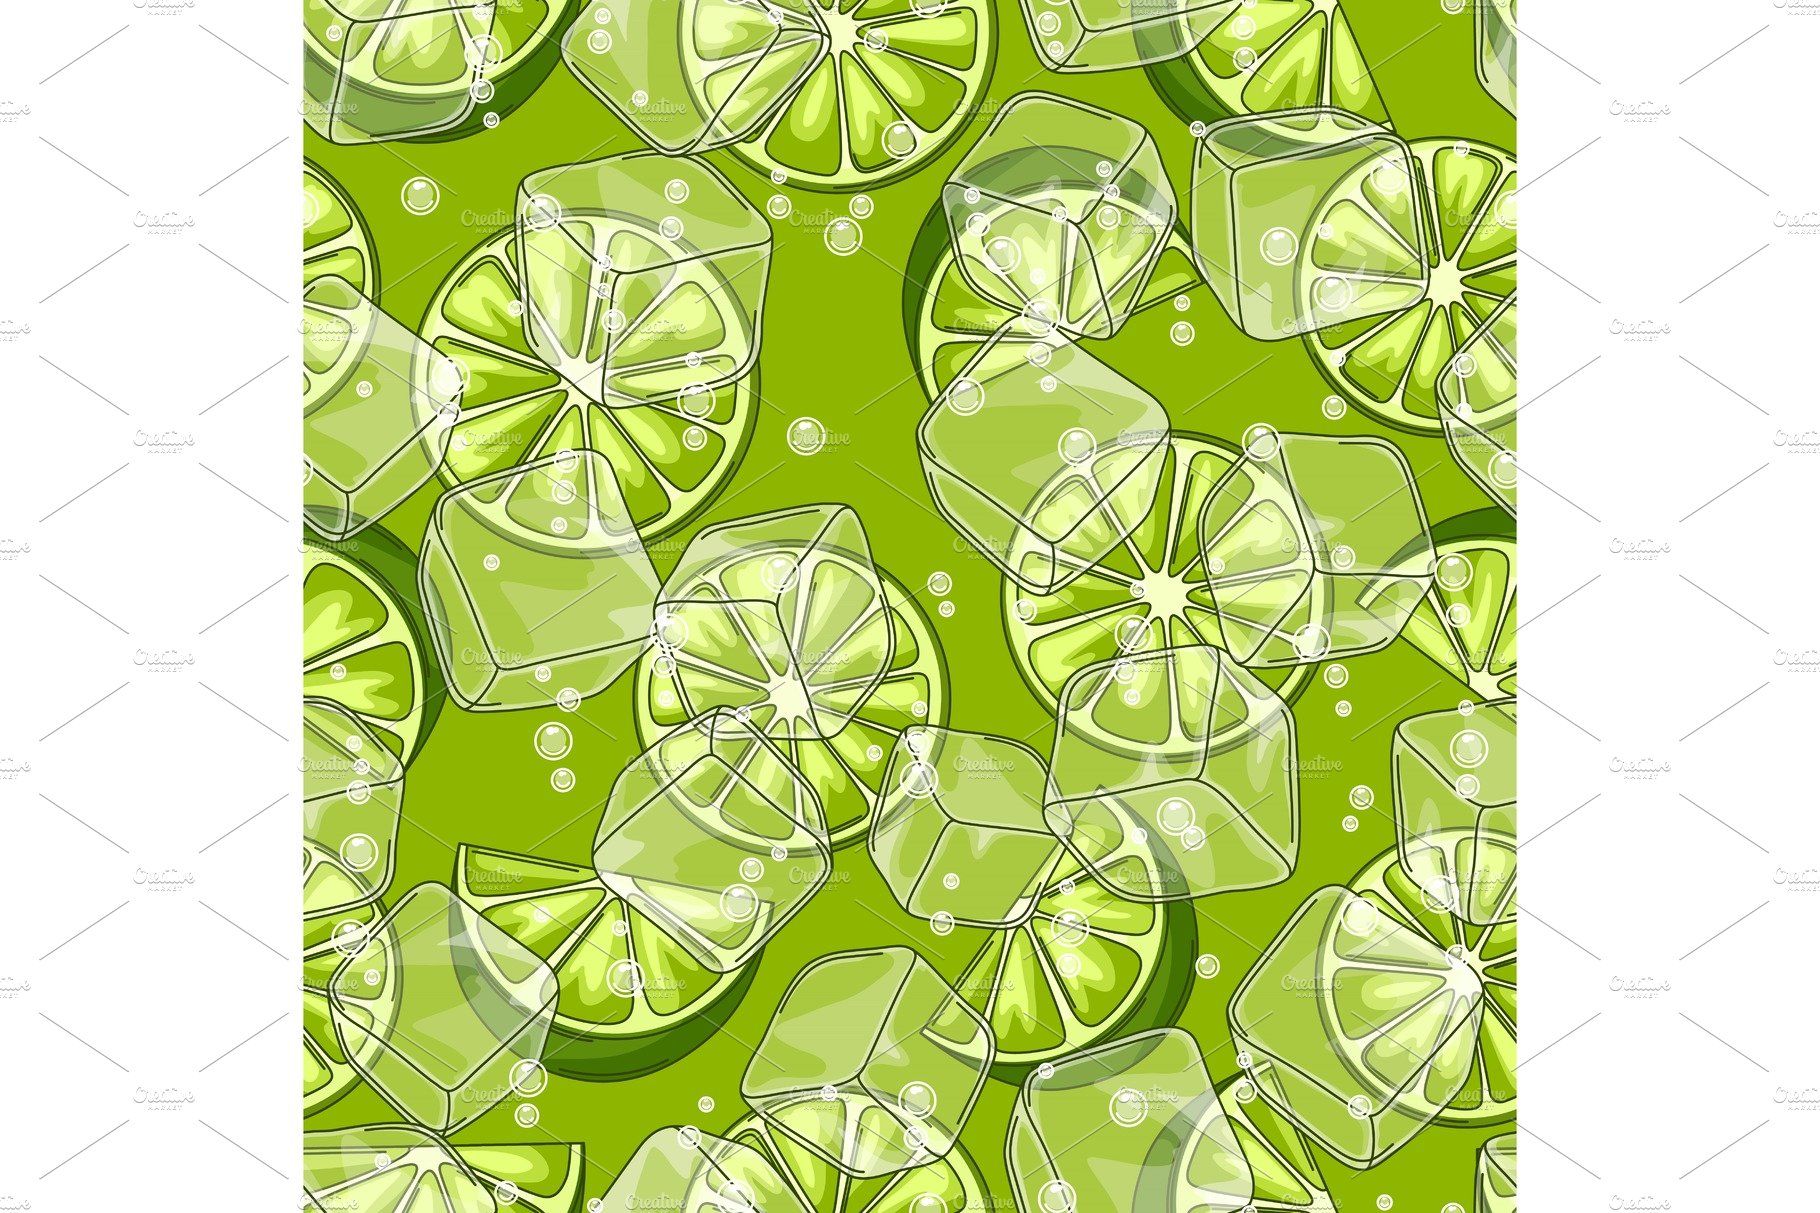 Seamless pattern with limes. Ice cover image.